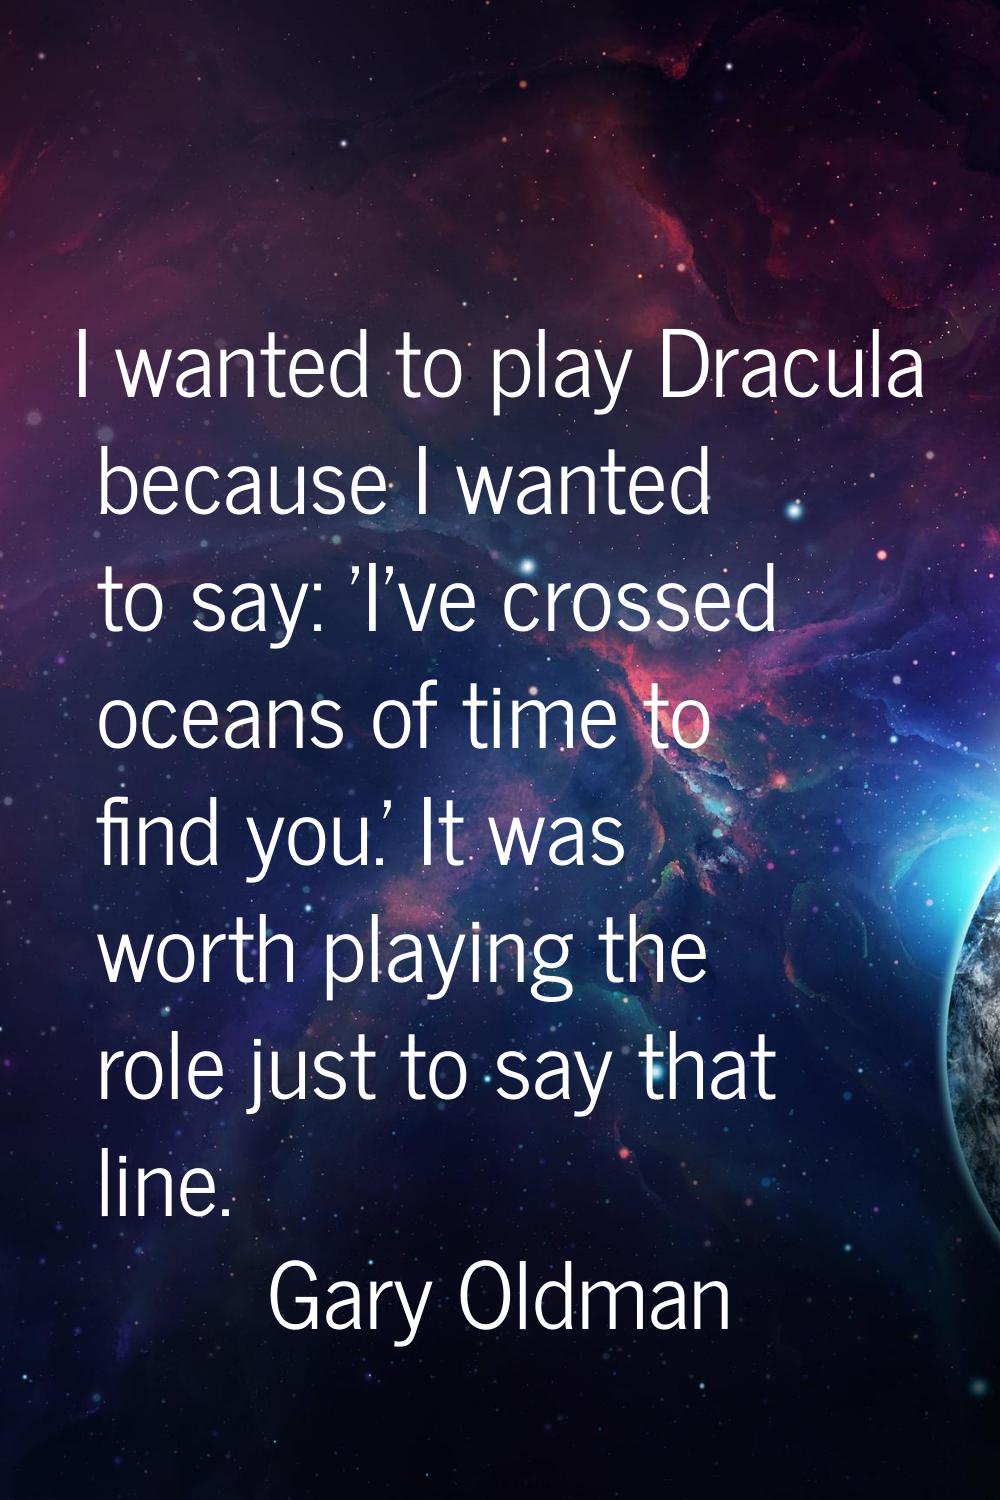 I wanted to play Dracula because I wanted to say: 'I've crossed oceans of time to find you.' It was